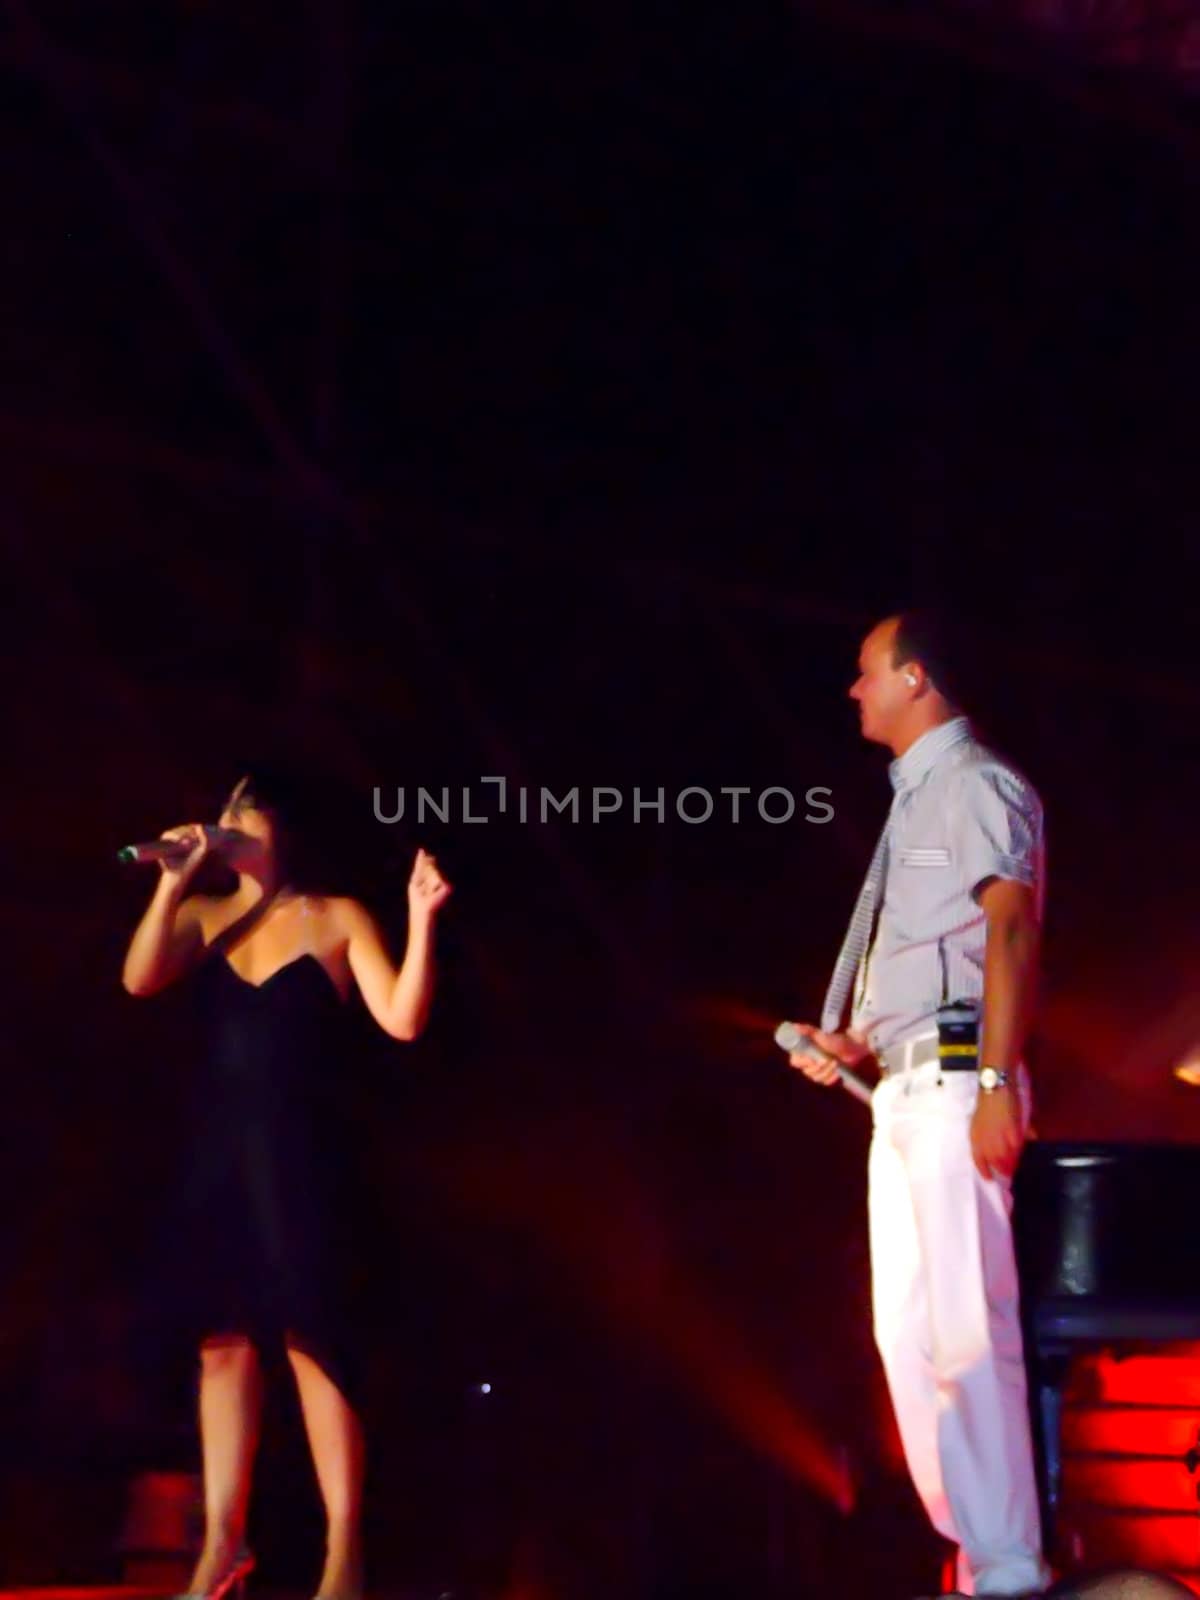 Famous Italian Neapolitan singer Gigi d'Alessio performing duet with local icon Ira Losco live in Malta on the 11th August 2007